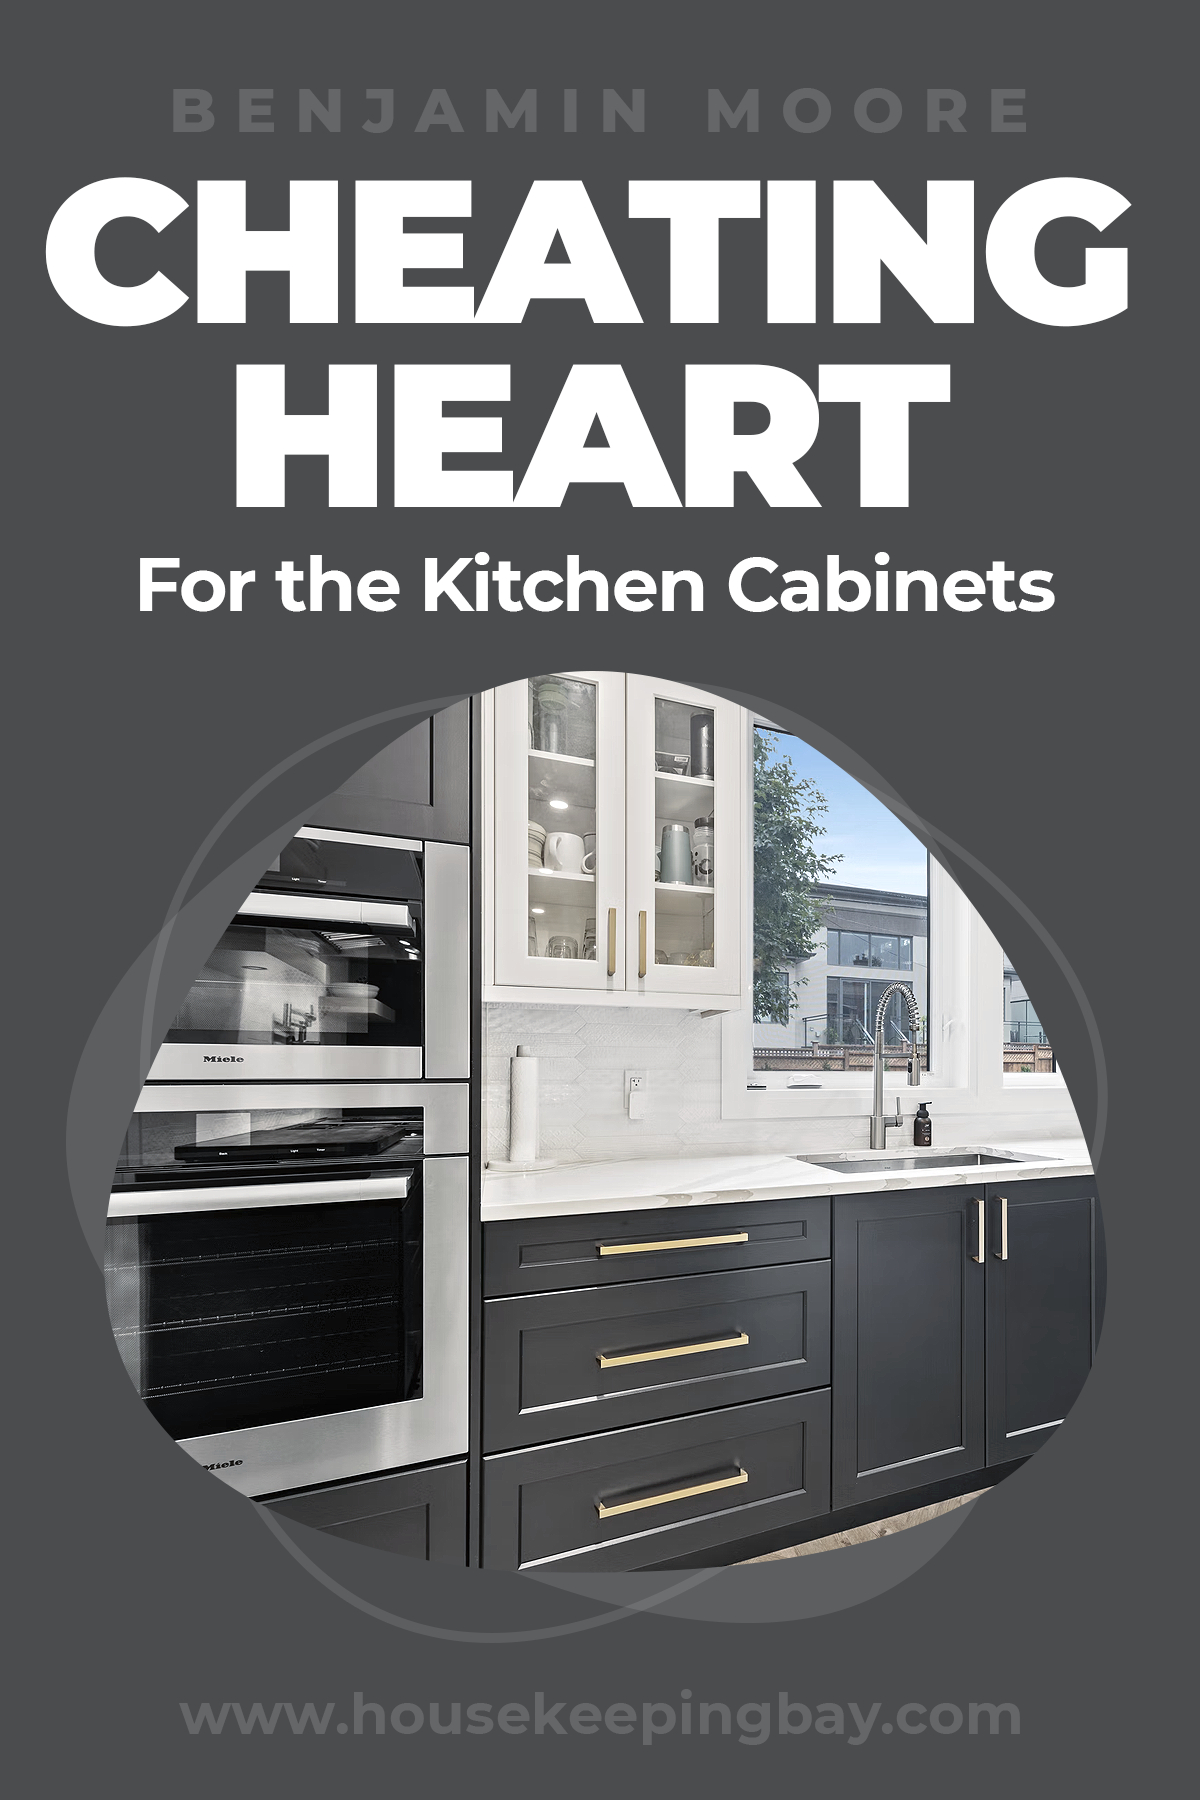 Cheating Heart for the kitchen cabinets